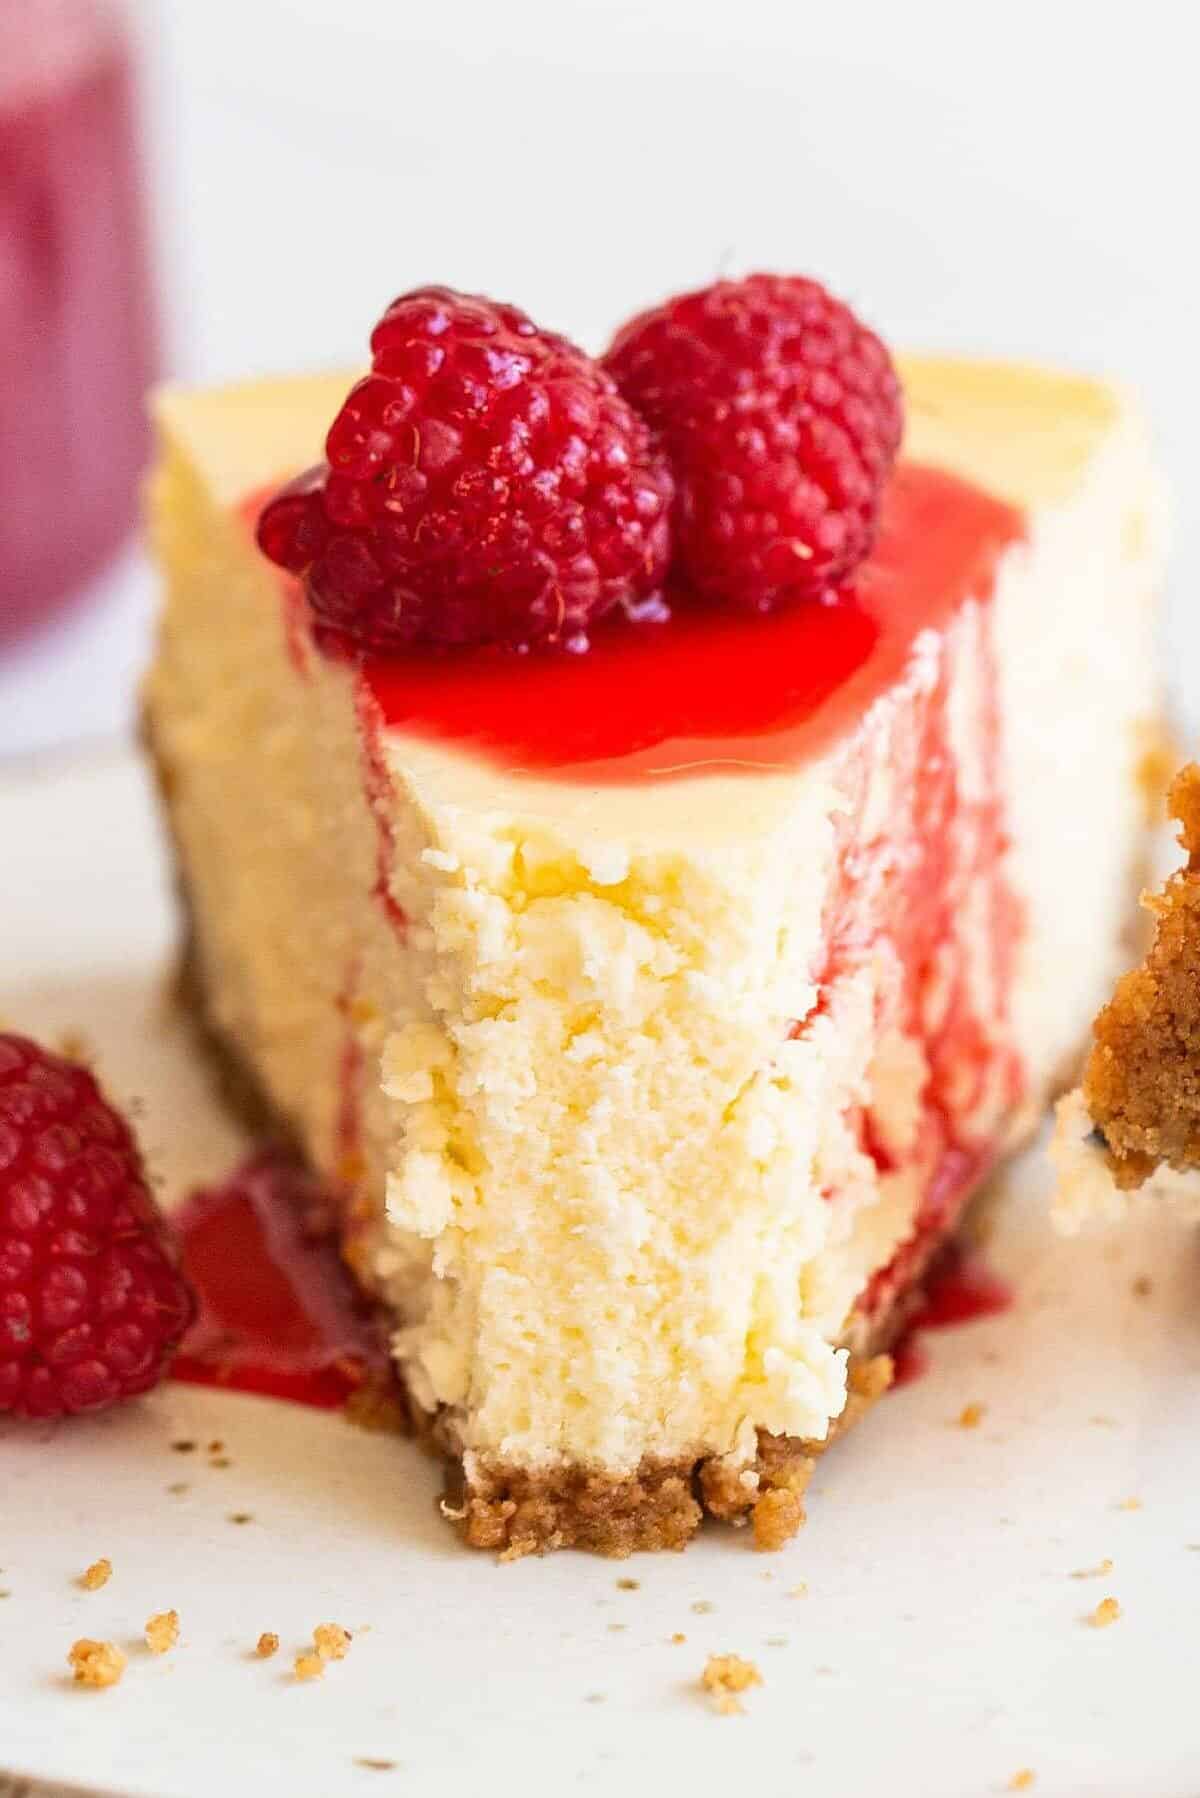 Deliciously Rich Cheesecake Recipe for a Sweet Treat